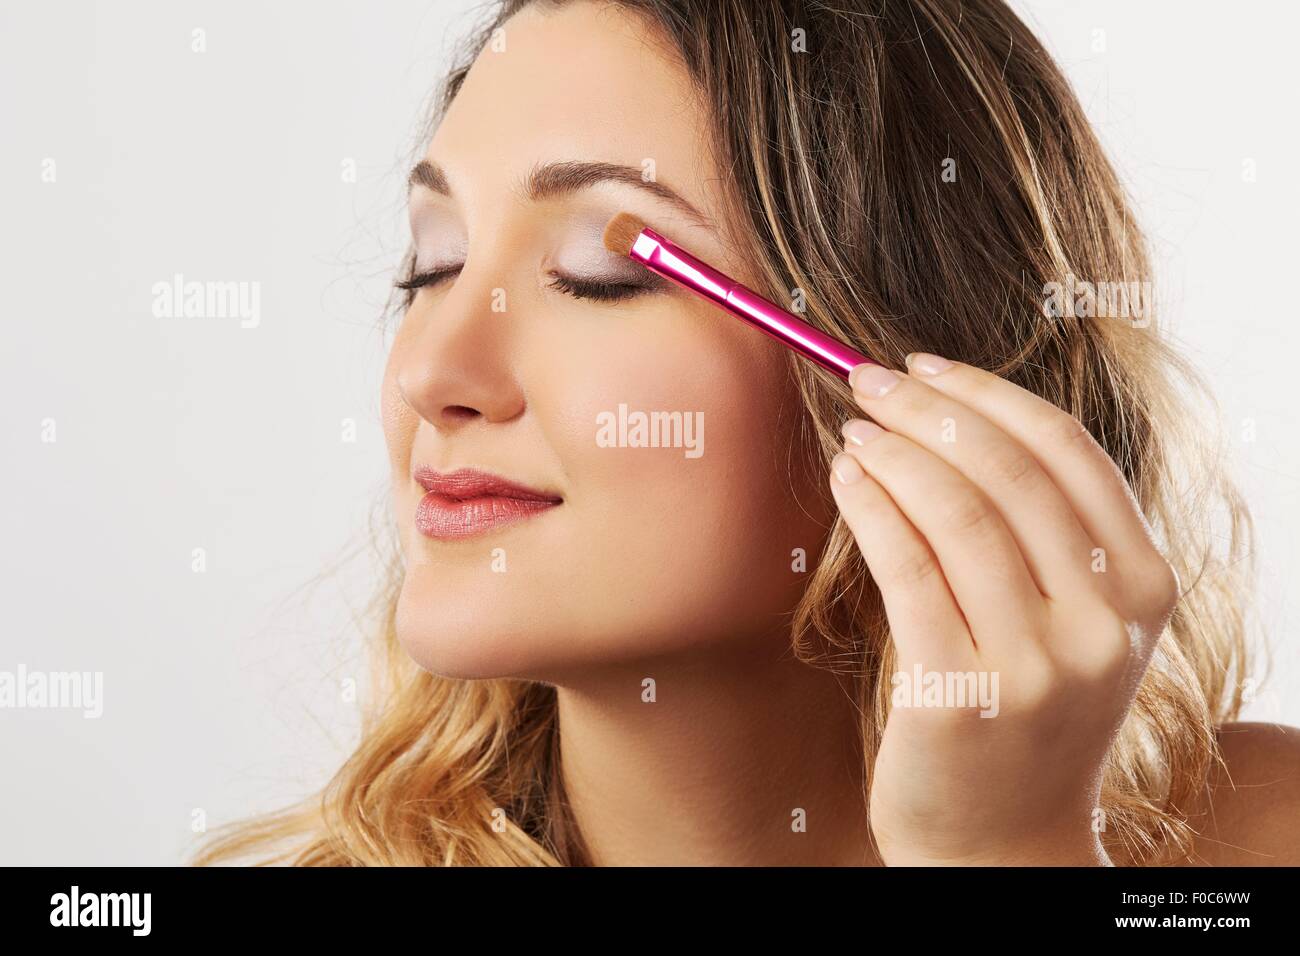 Young woman applying eyeshadow Banque D'Images